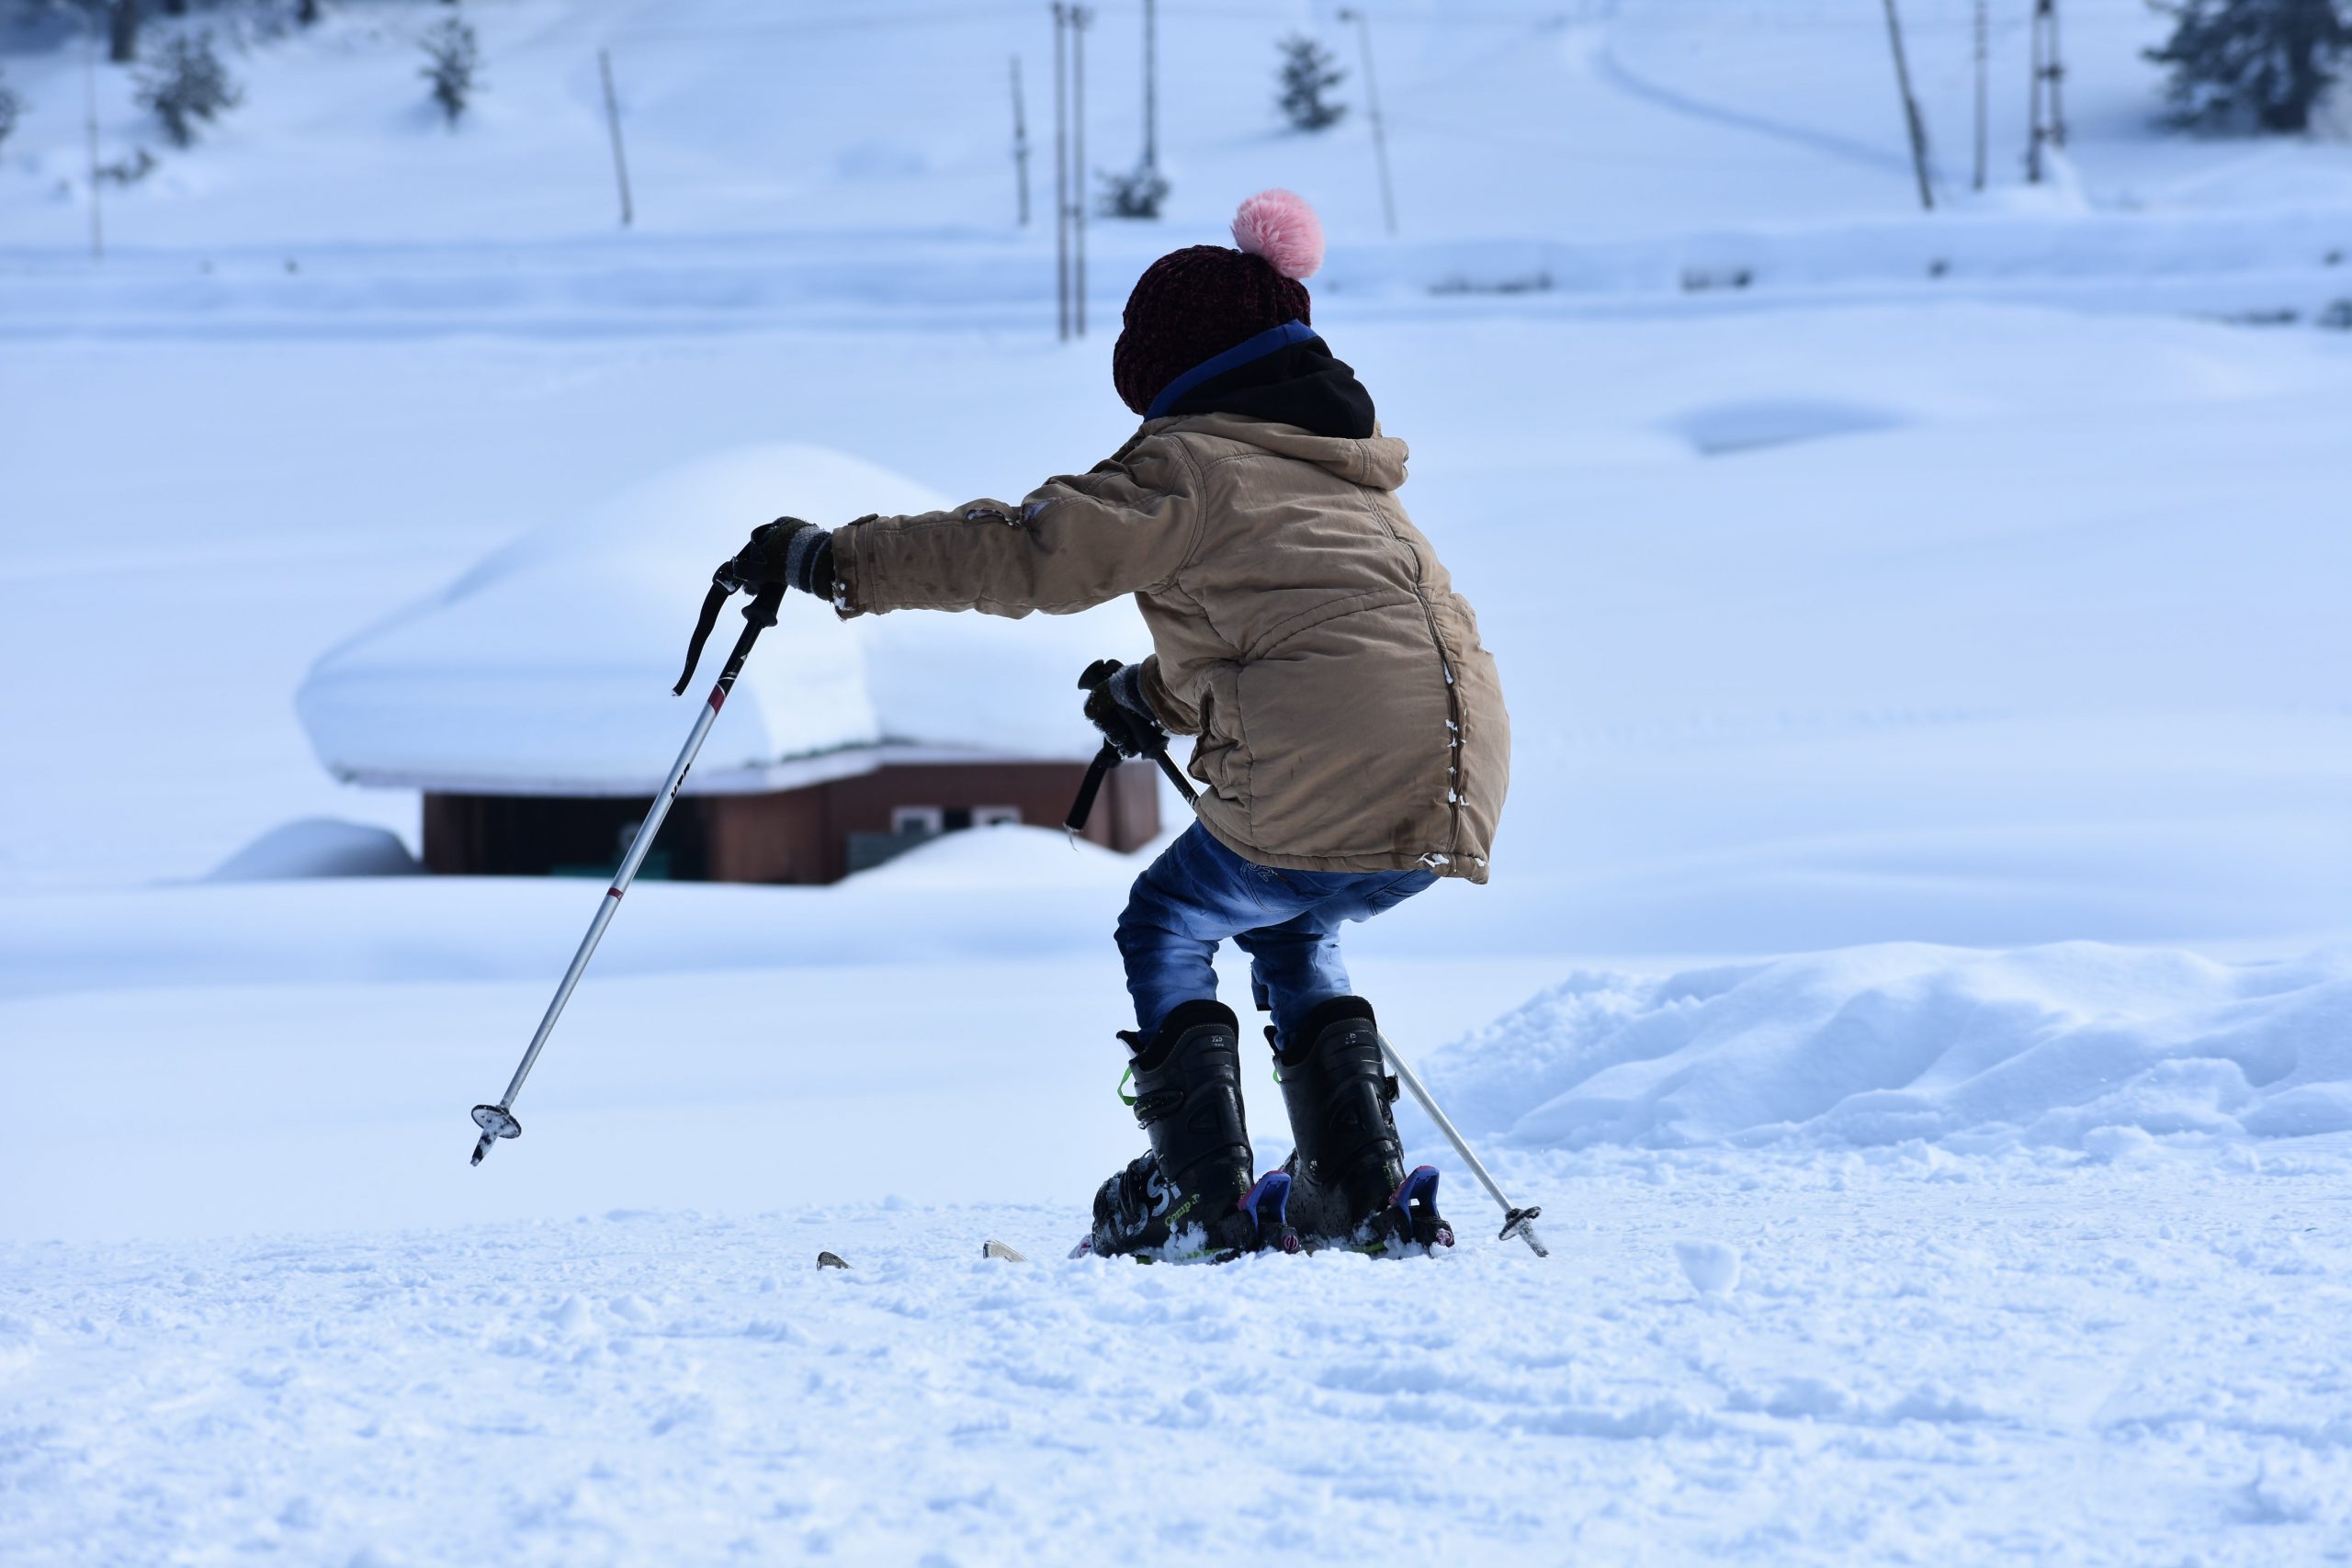 Picture of Beginner Learning to Ski